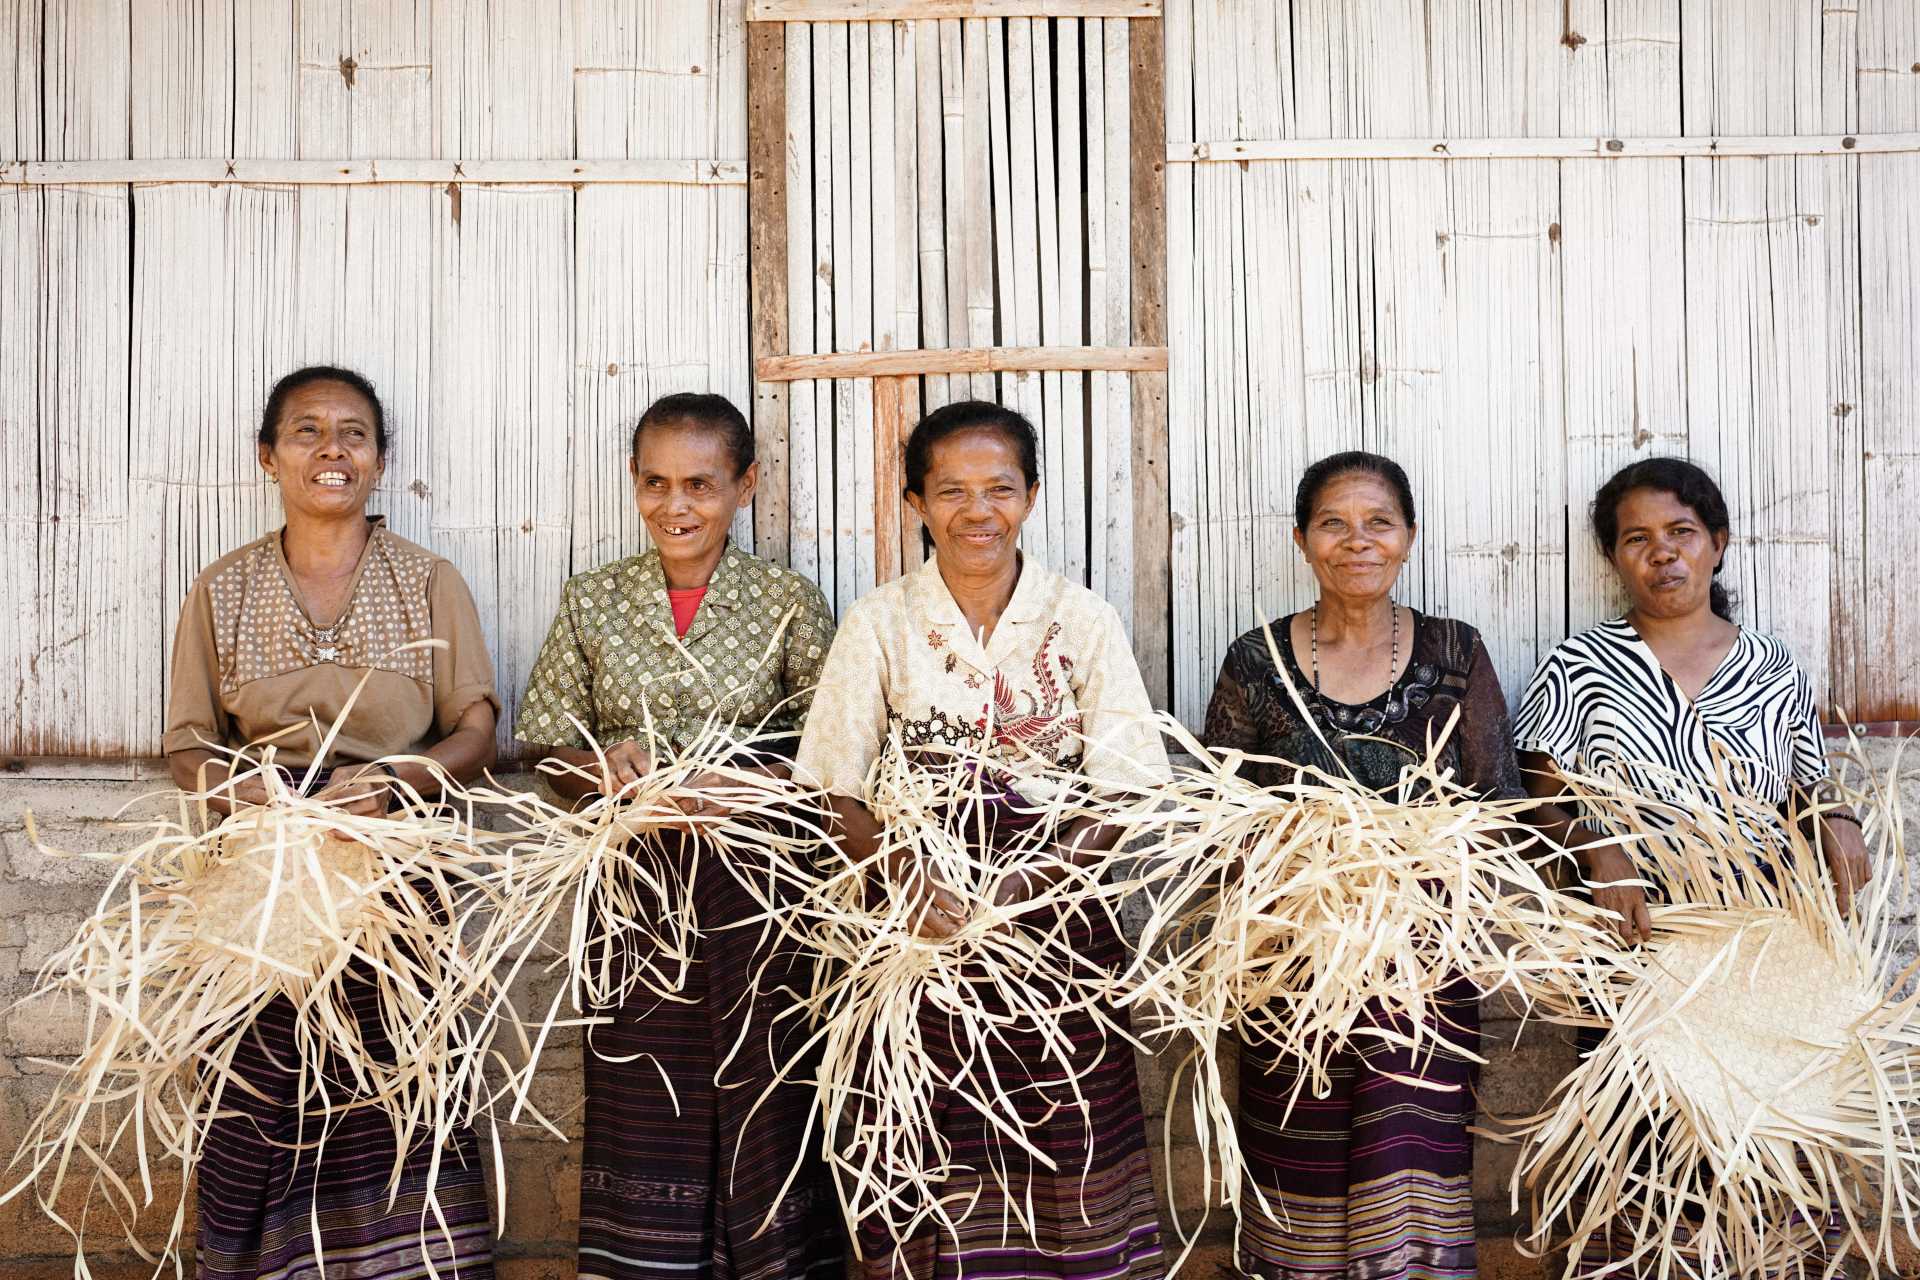 Local craftswomen from Flores weave Palmira leaves into the raw materials used in a range of handmade products.